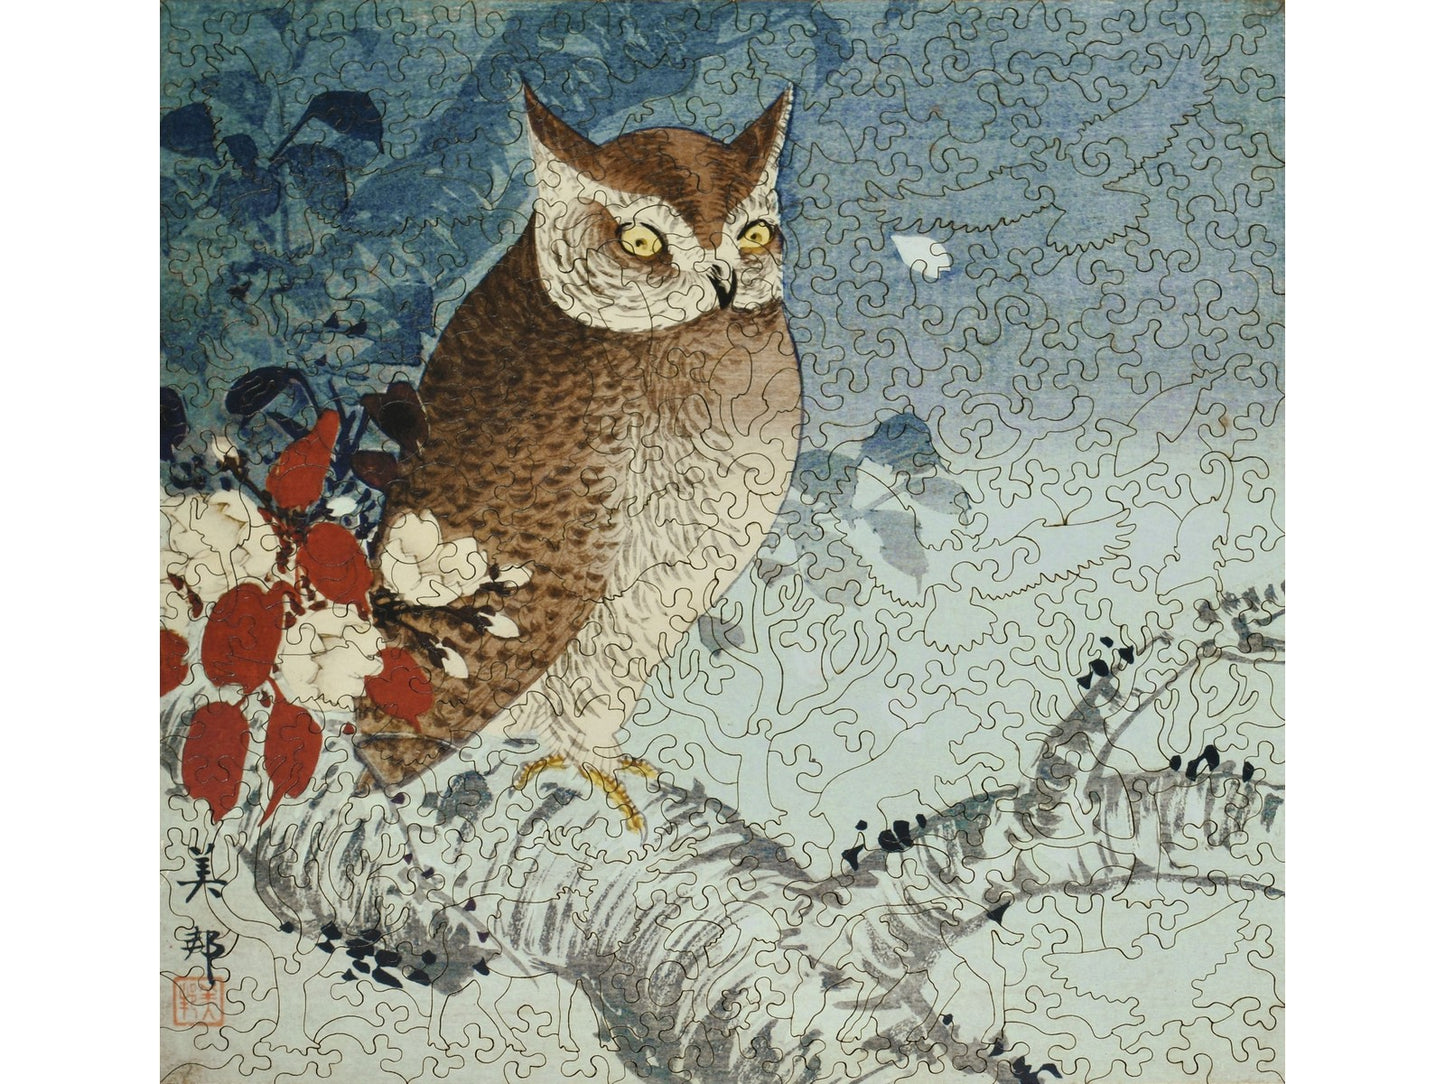 The front of the puzzle, Owl and Cherry Branch, which shows an owl sitting on the branch of a tree.